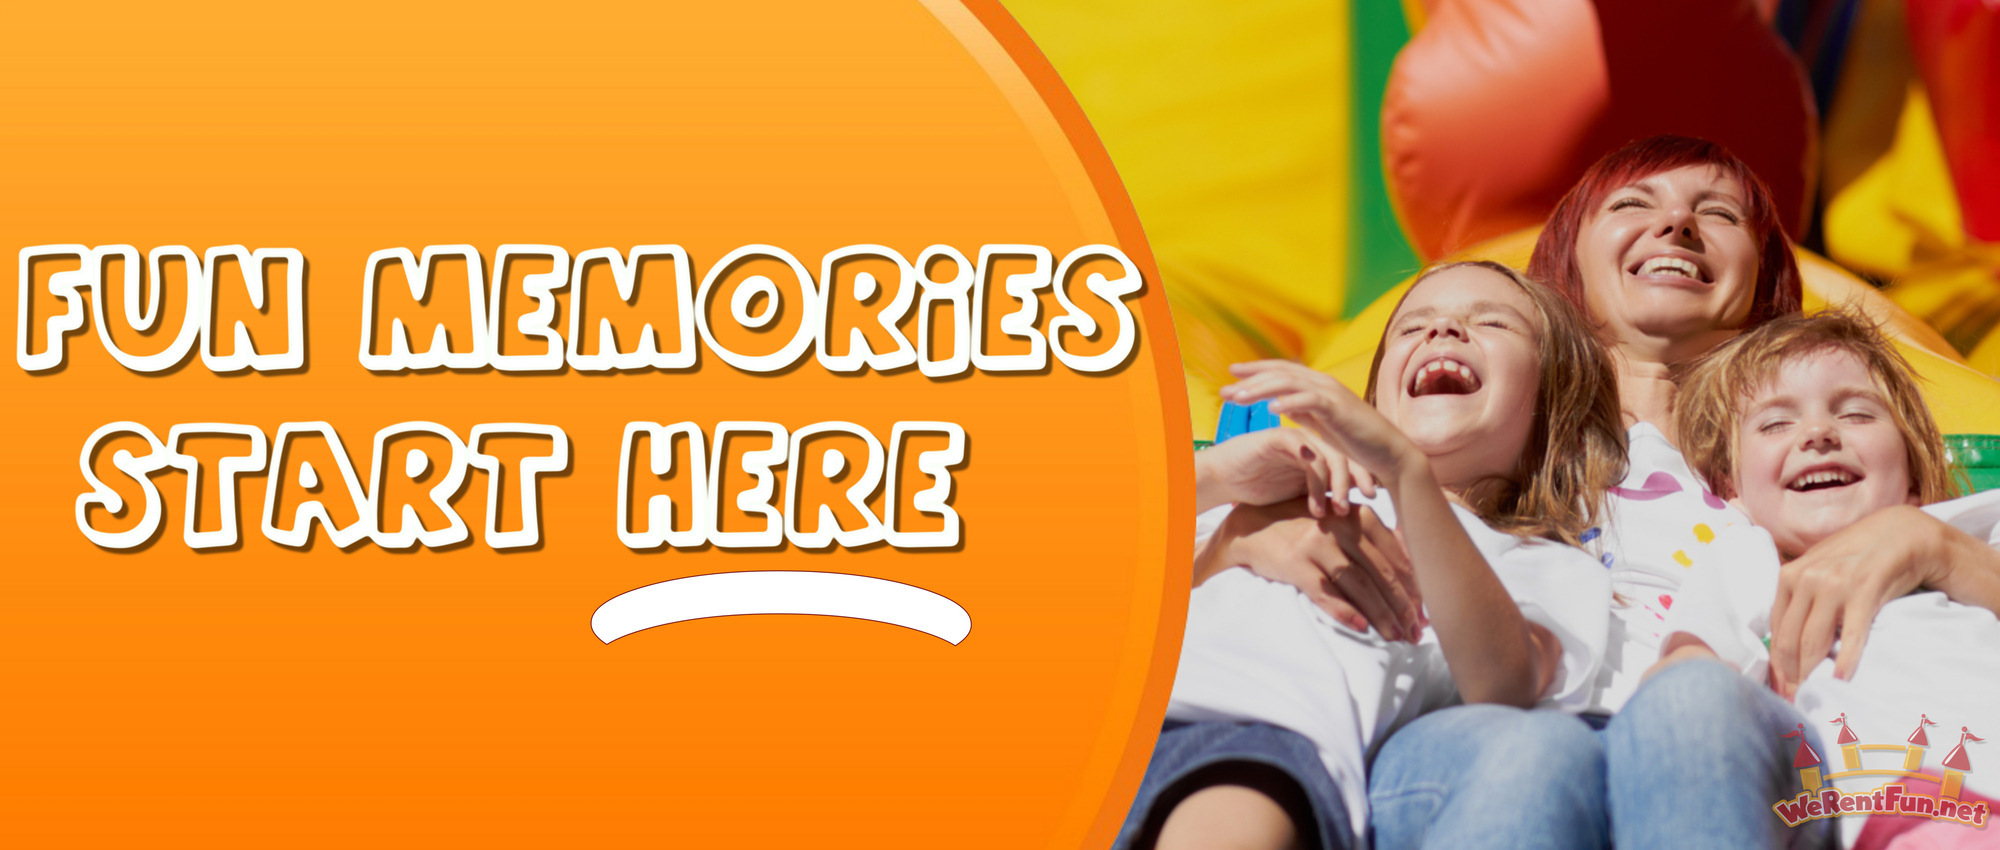 key west bounce house rentals